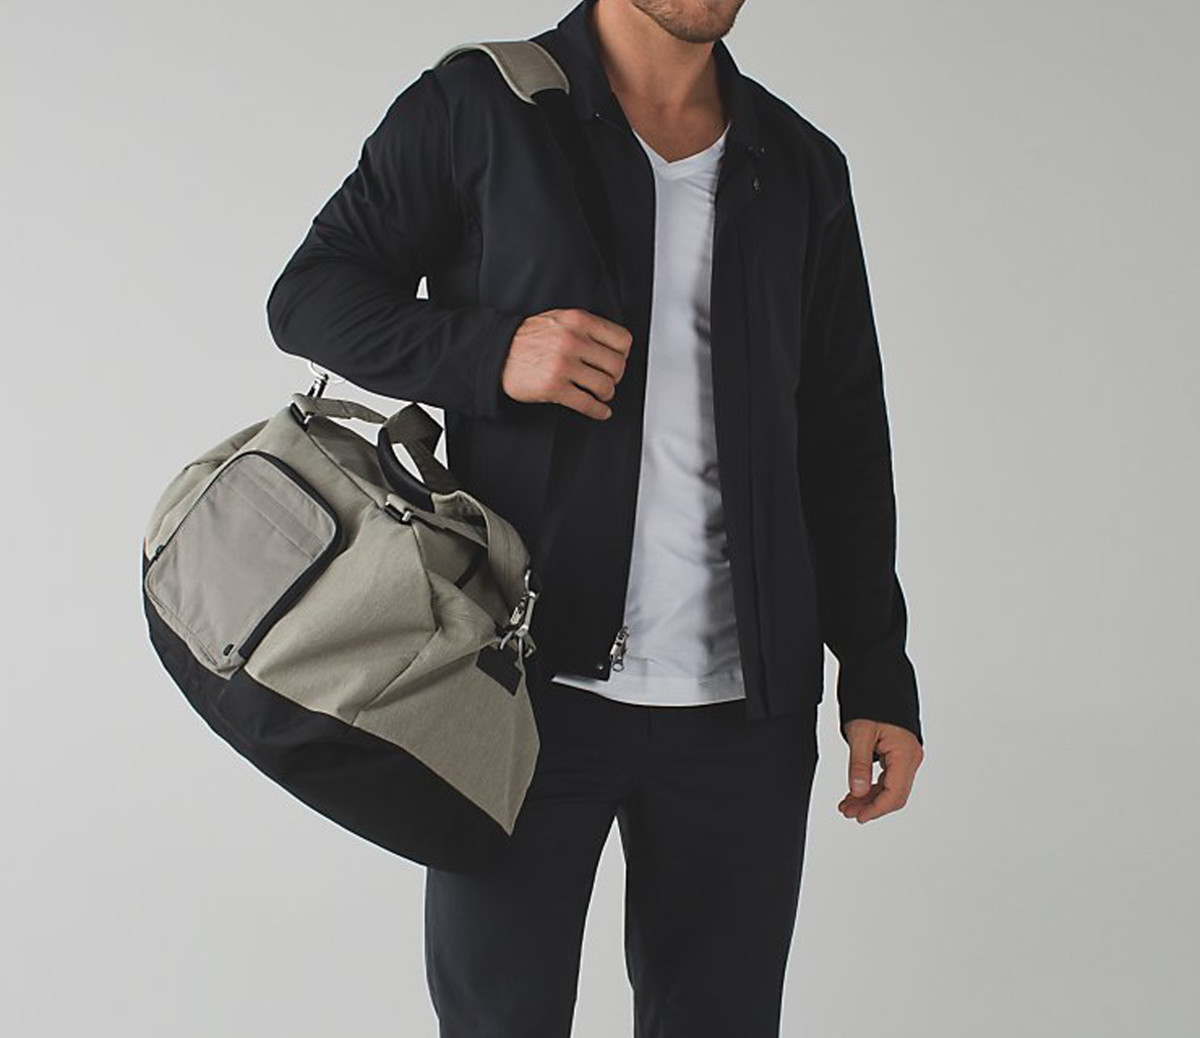 The Best Bags for Men to Transition From Work to the Gym - Men's